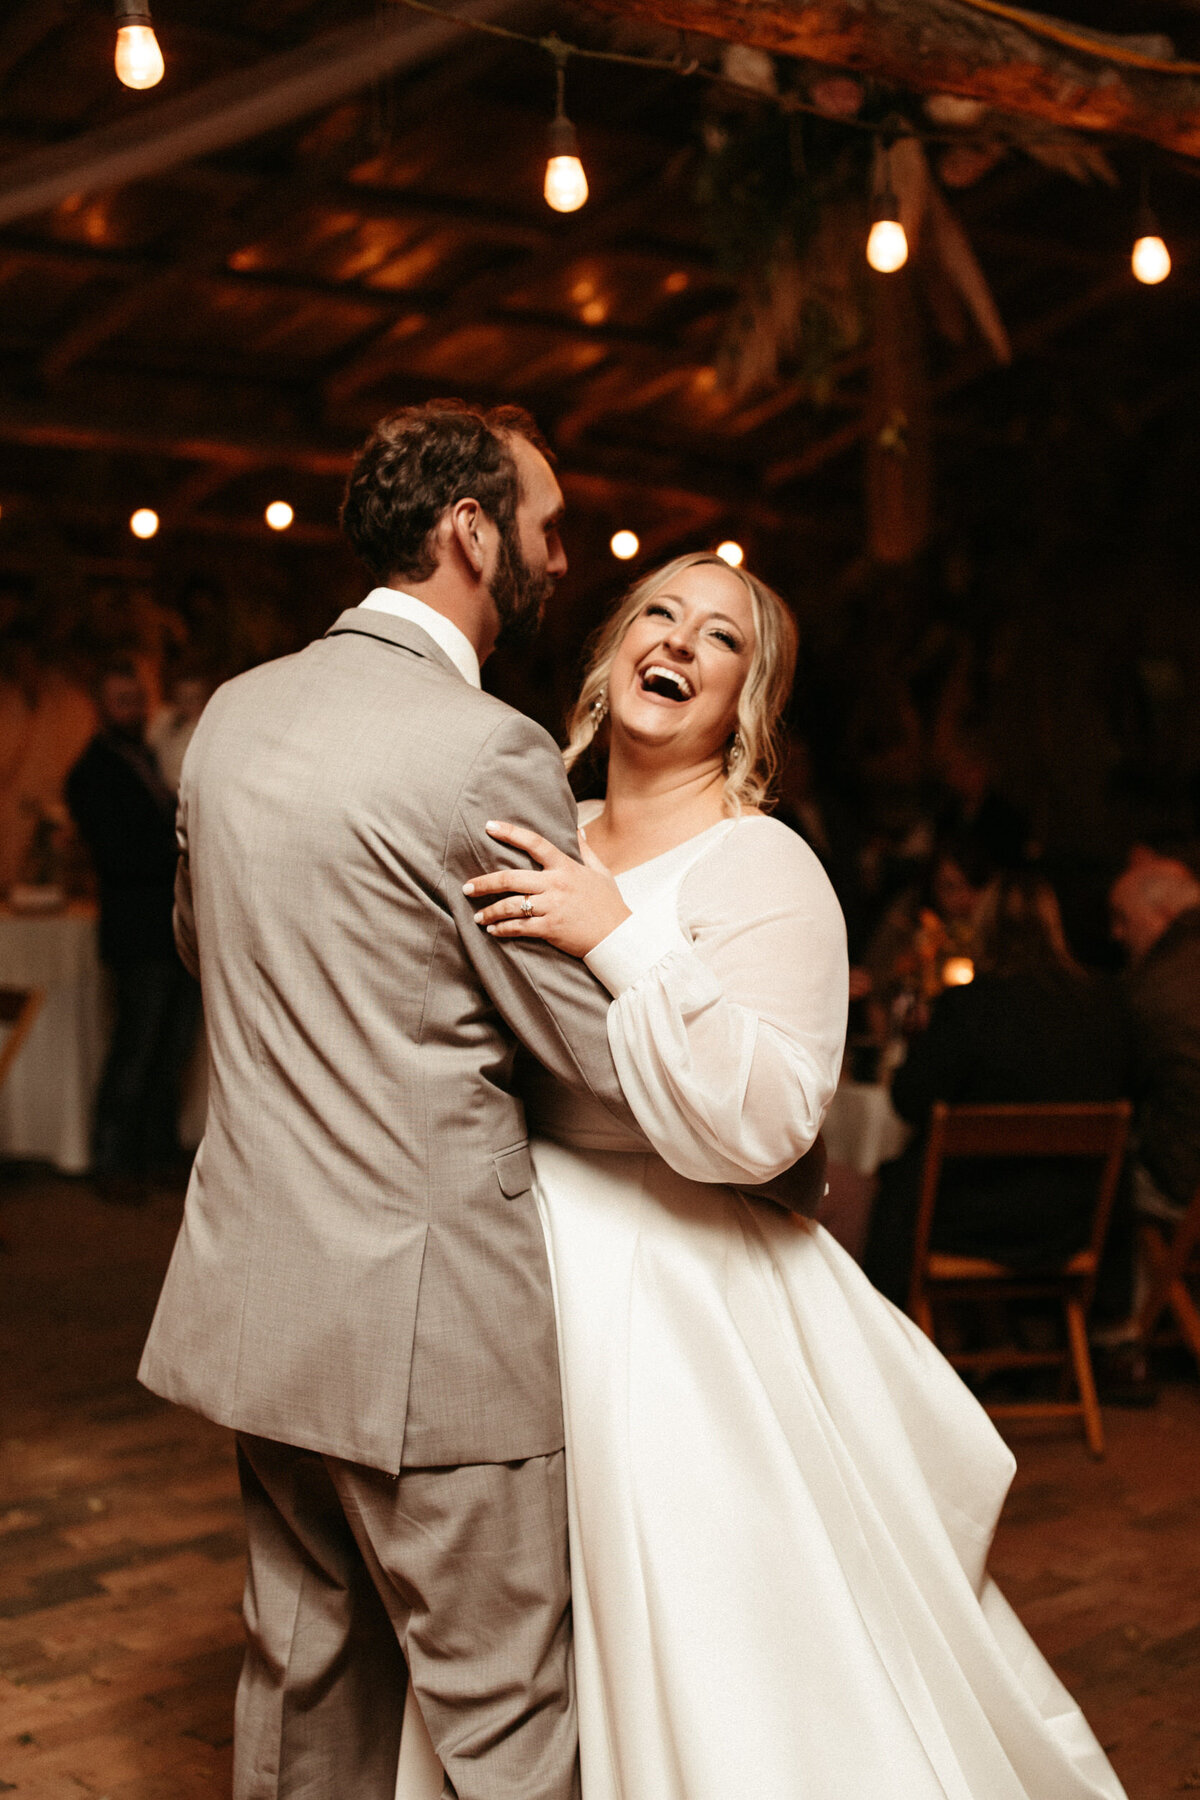 Happy bride bursting out in laughter during the first dance with her groom underneath stringed lights